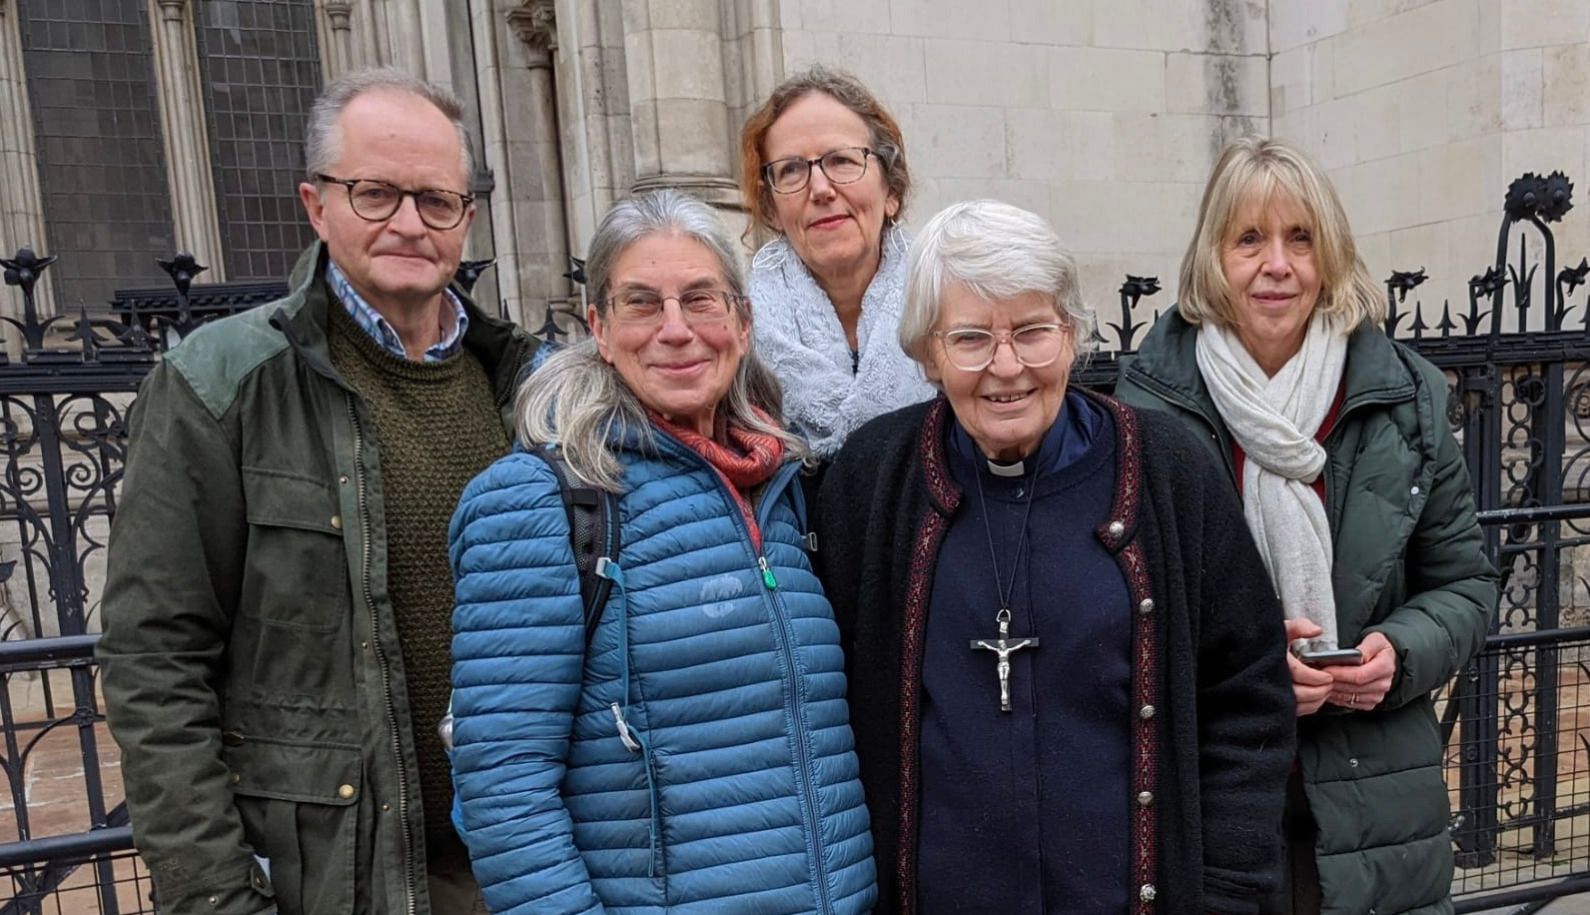 Rev Sue Parfitt (front right), 79, from Christian Climate Action